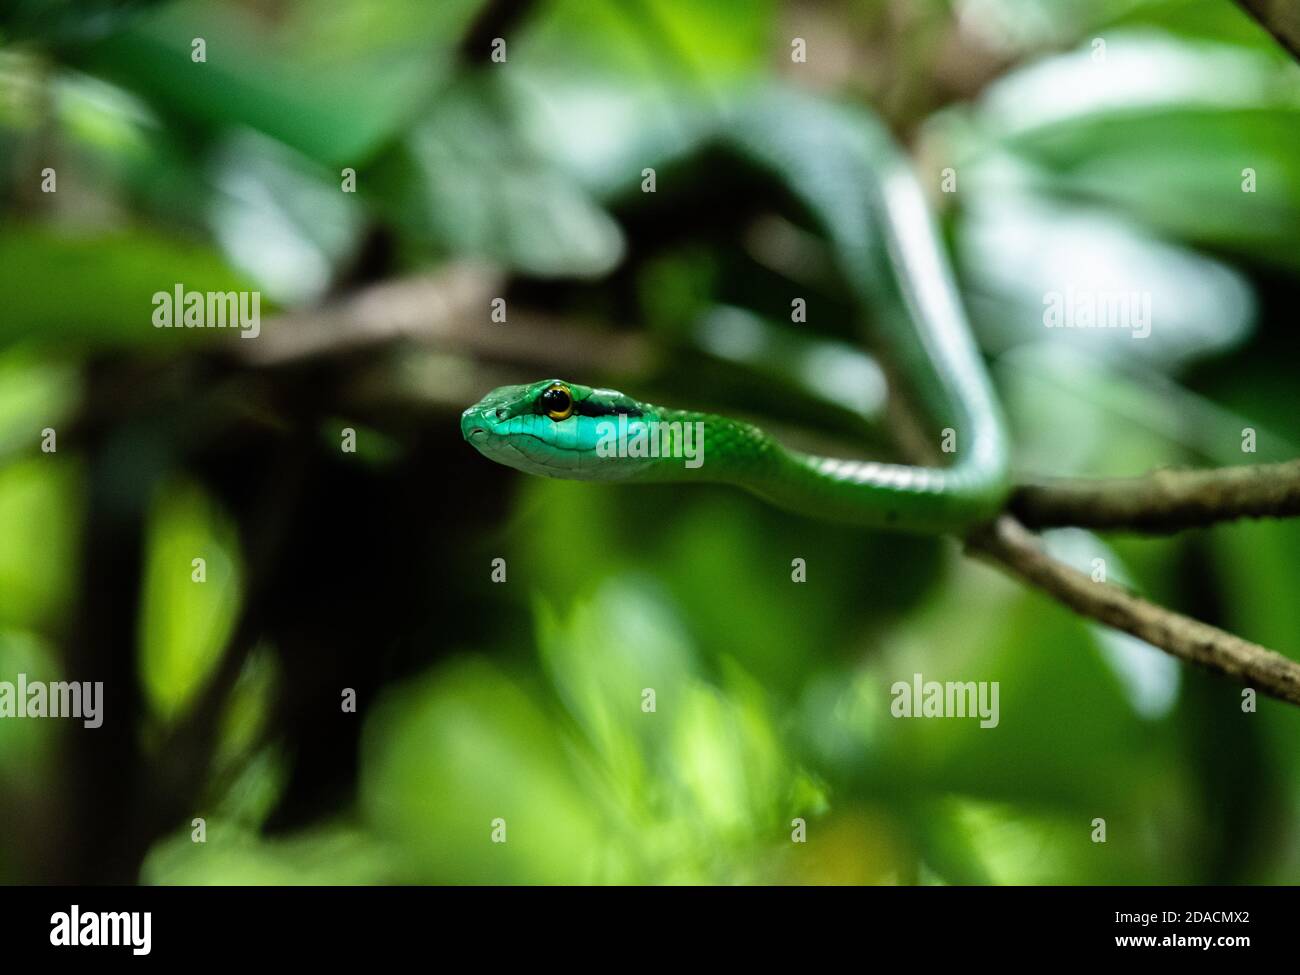 Leptophis ahaetulla, parrot snake, lora, hiding and hanging on tree branch, Rainforest Costa Rica, central america jungle, camouflage, National Park Stock Photo